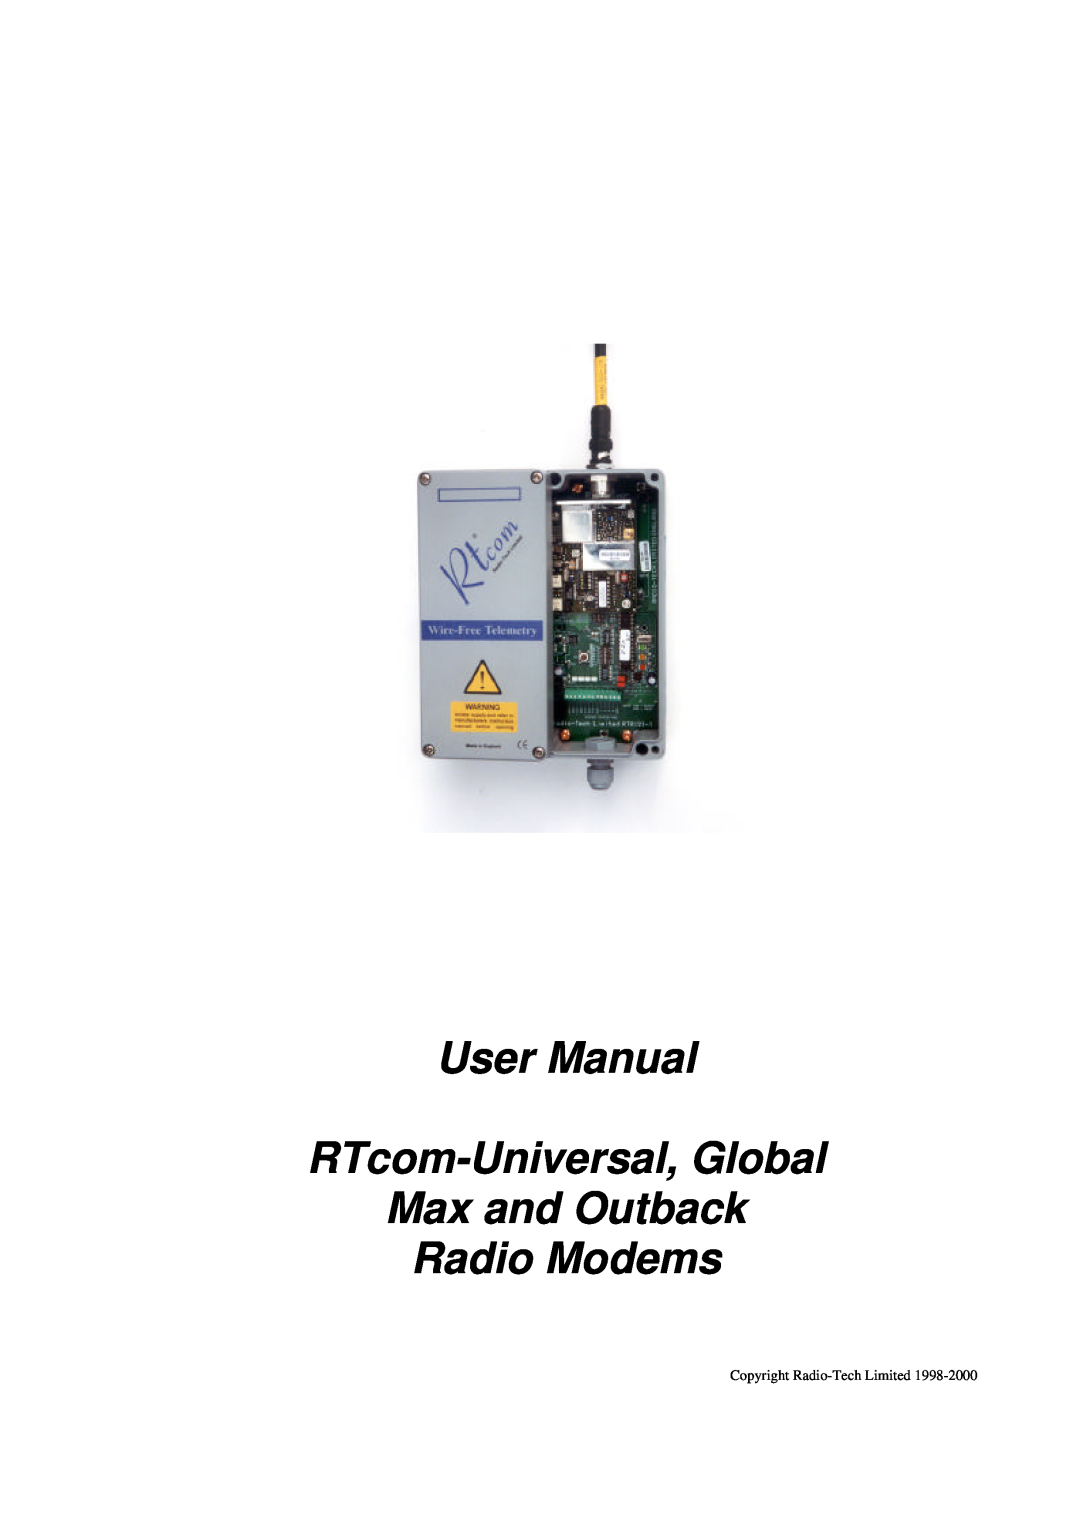 RTcom user manual User Manual RTcom-Universal, Global Max and Outback Radio Modems, Copyright Radio-Tech Limited 